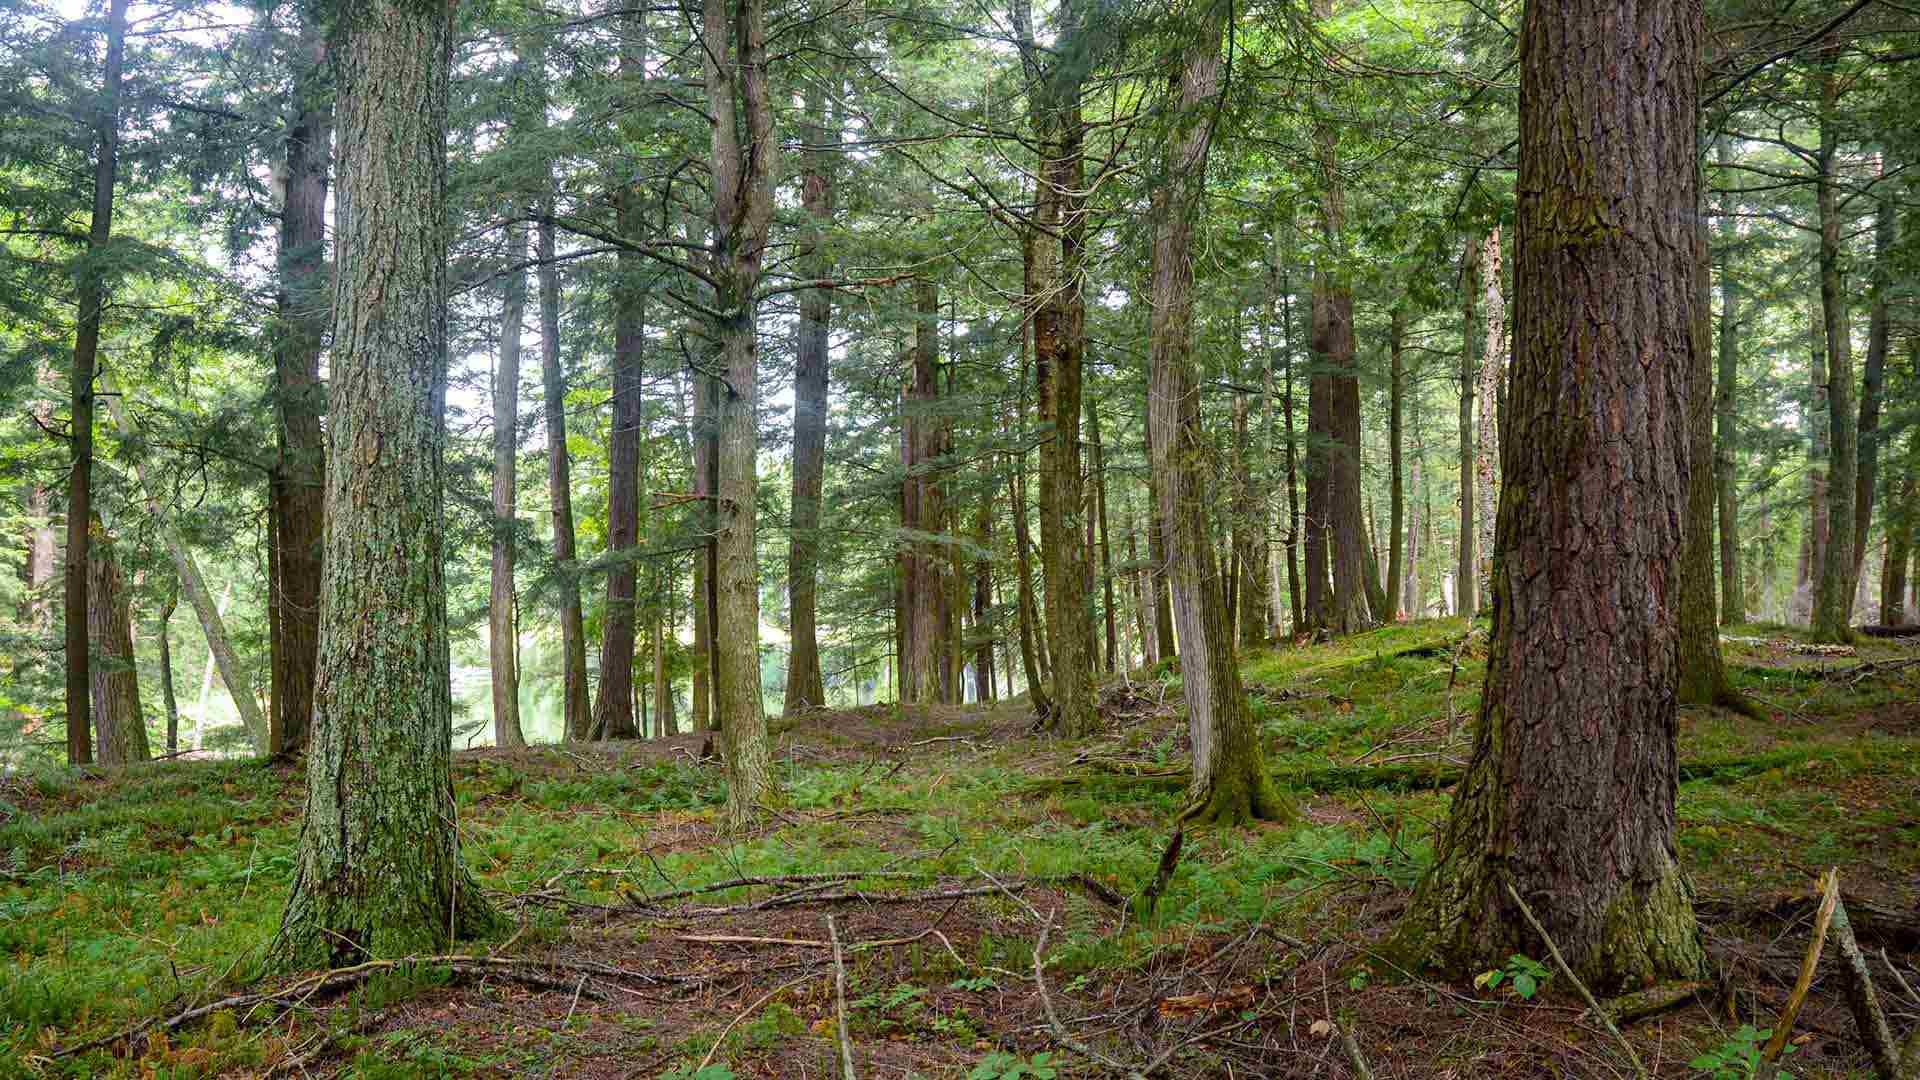 Old-growth forests, such as these hemlock trees from Michigan, play important roles in carbon storage yet are declining dramatically, according to new research from the Earth System Science Interdisciplinary Center. Photo by Jody Peters.